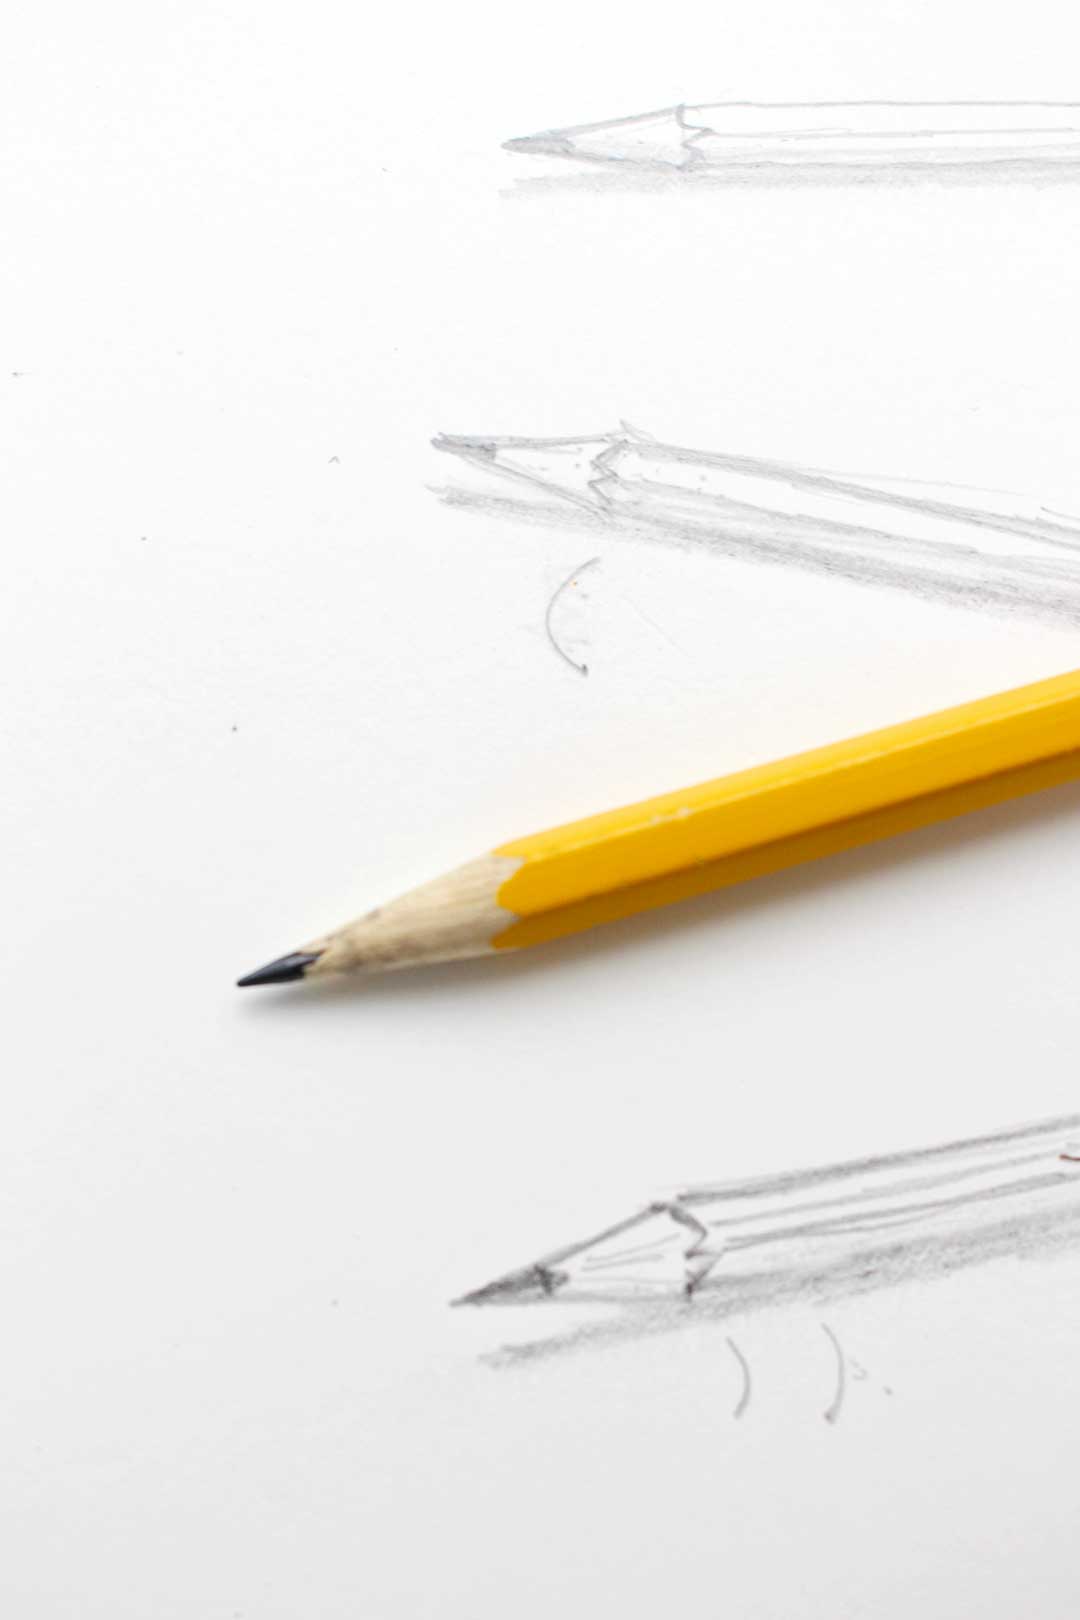 Close up view of the tip of a pencil resting on sketch pad.